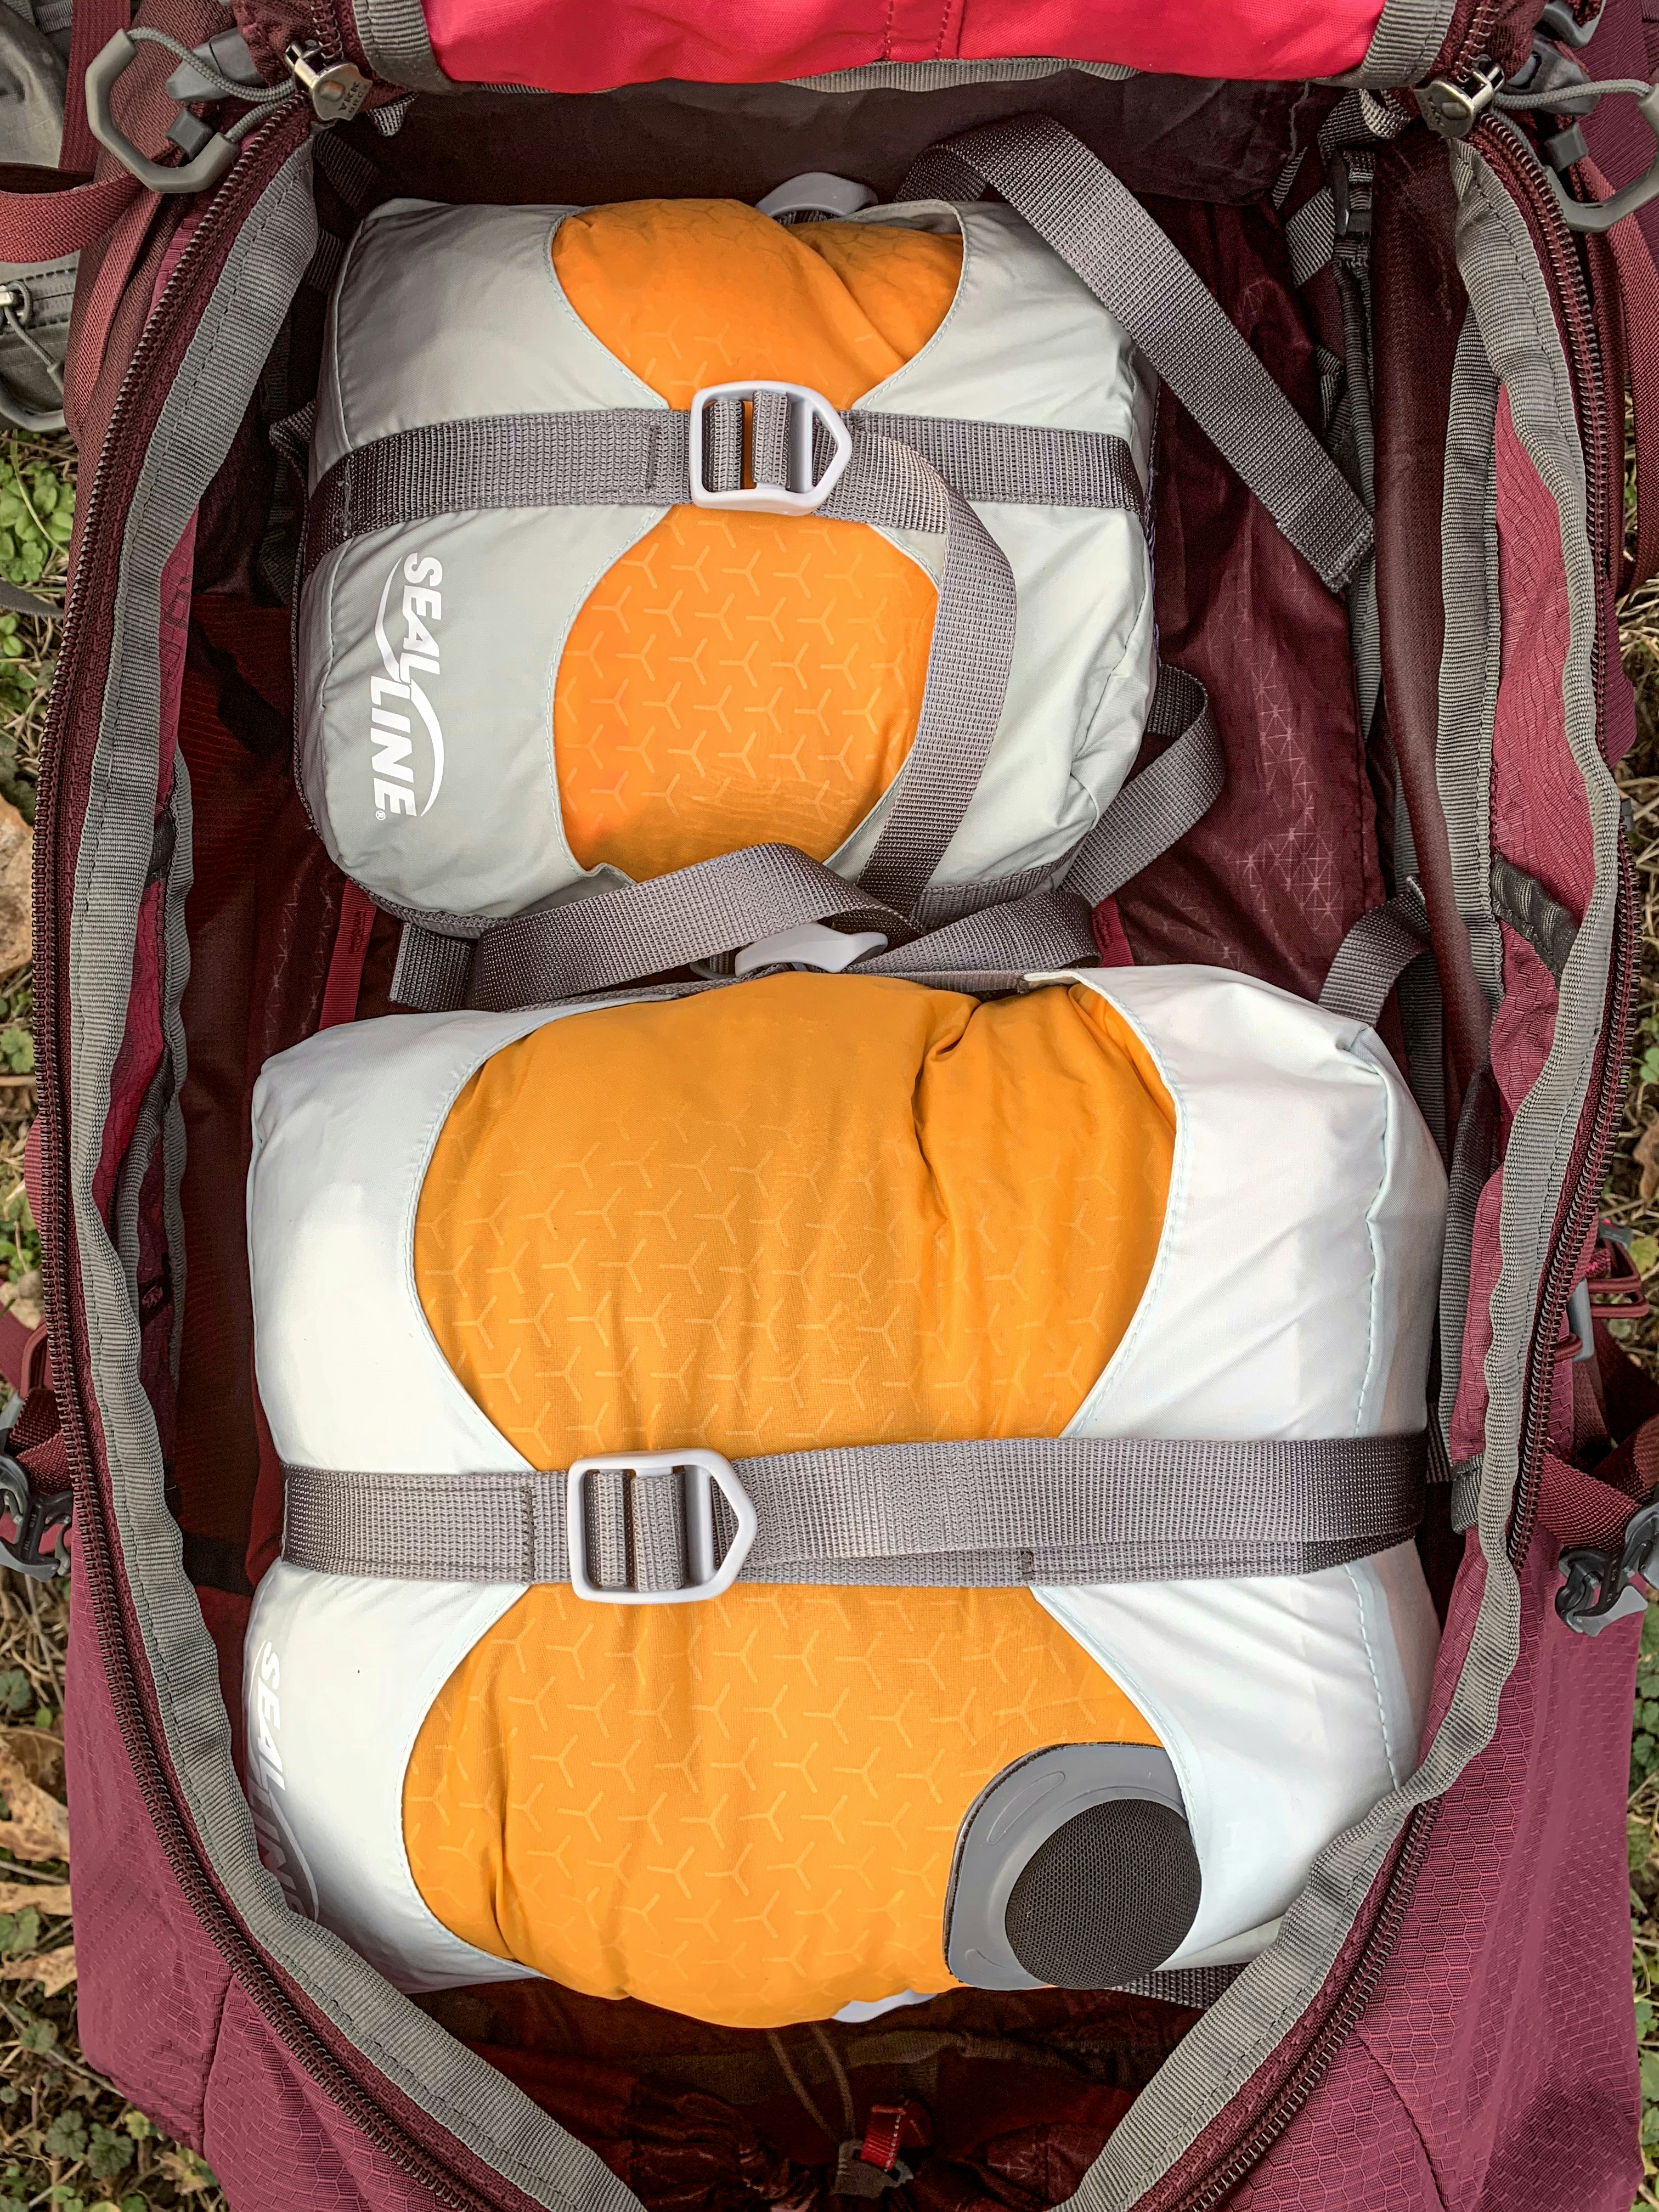 Drybags fit snugly into a backpack